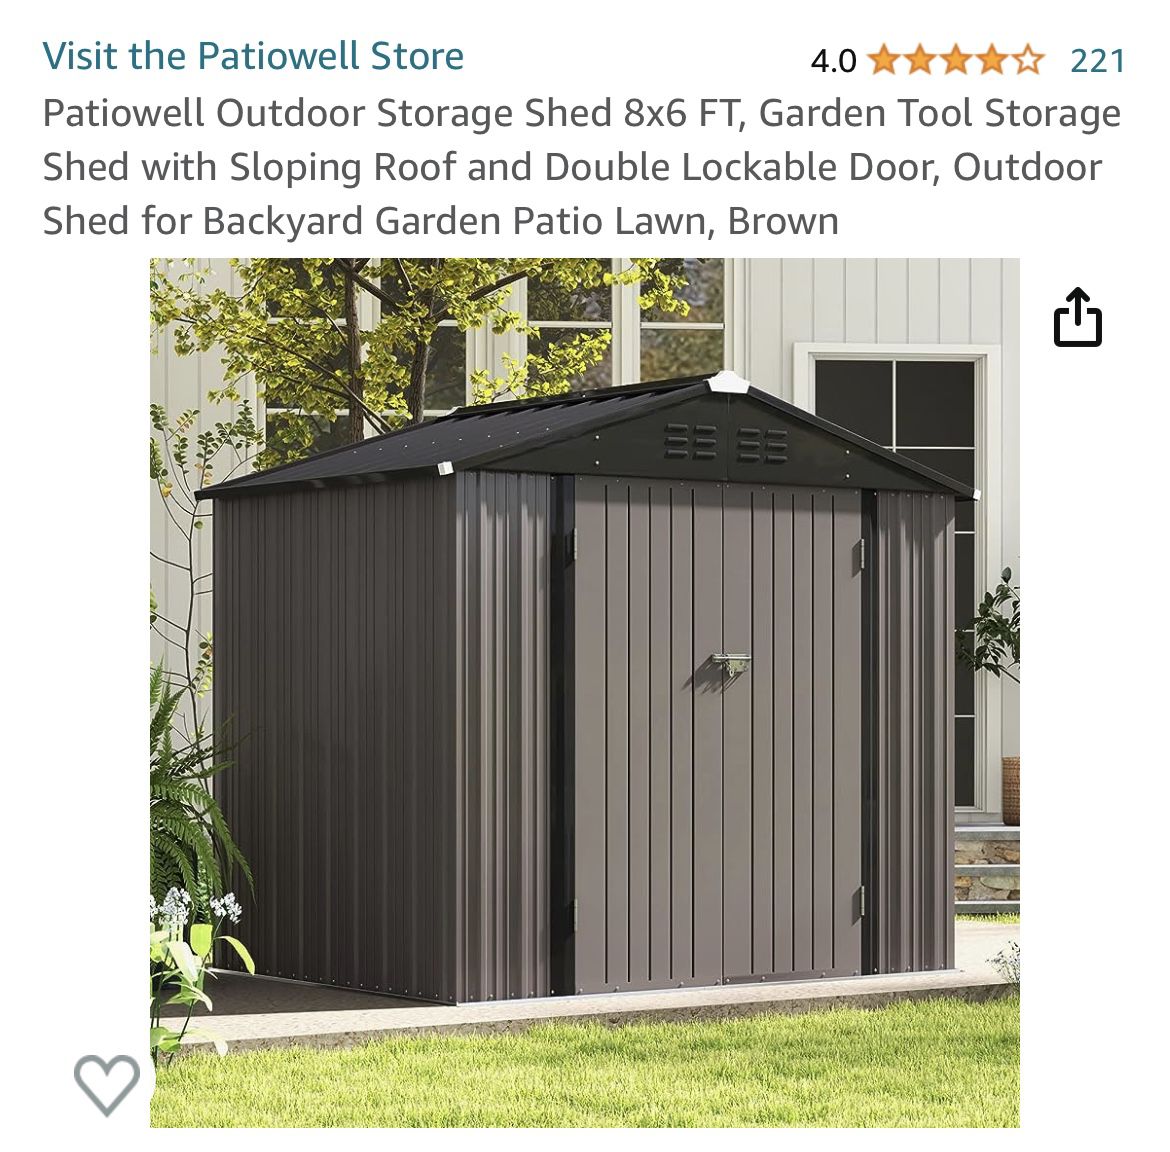 Shed Brand New In Box 